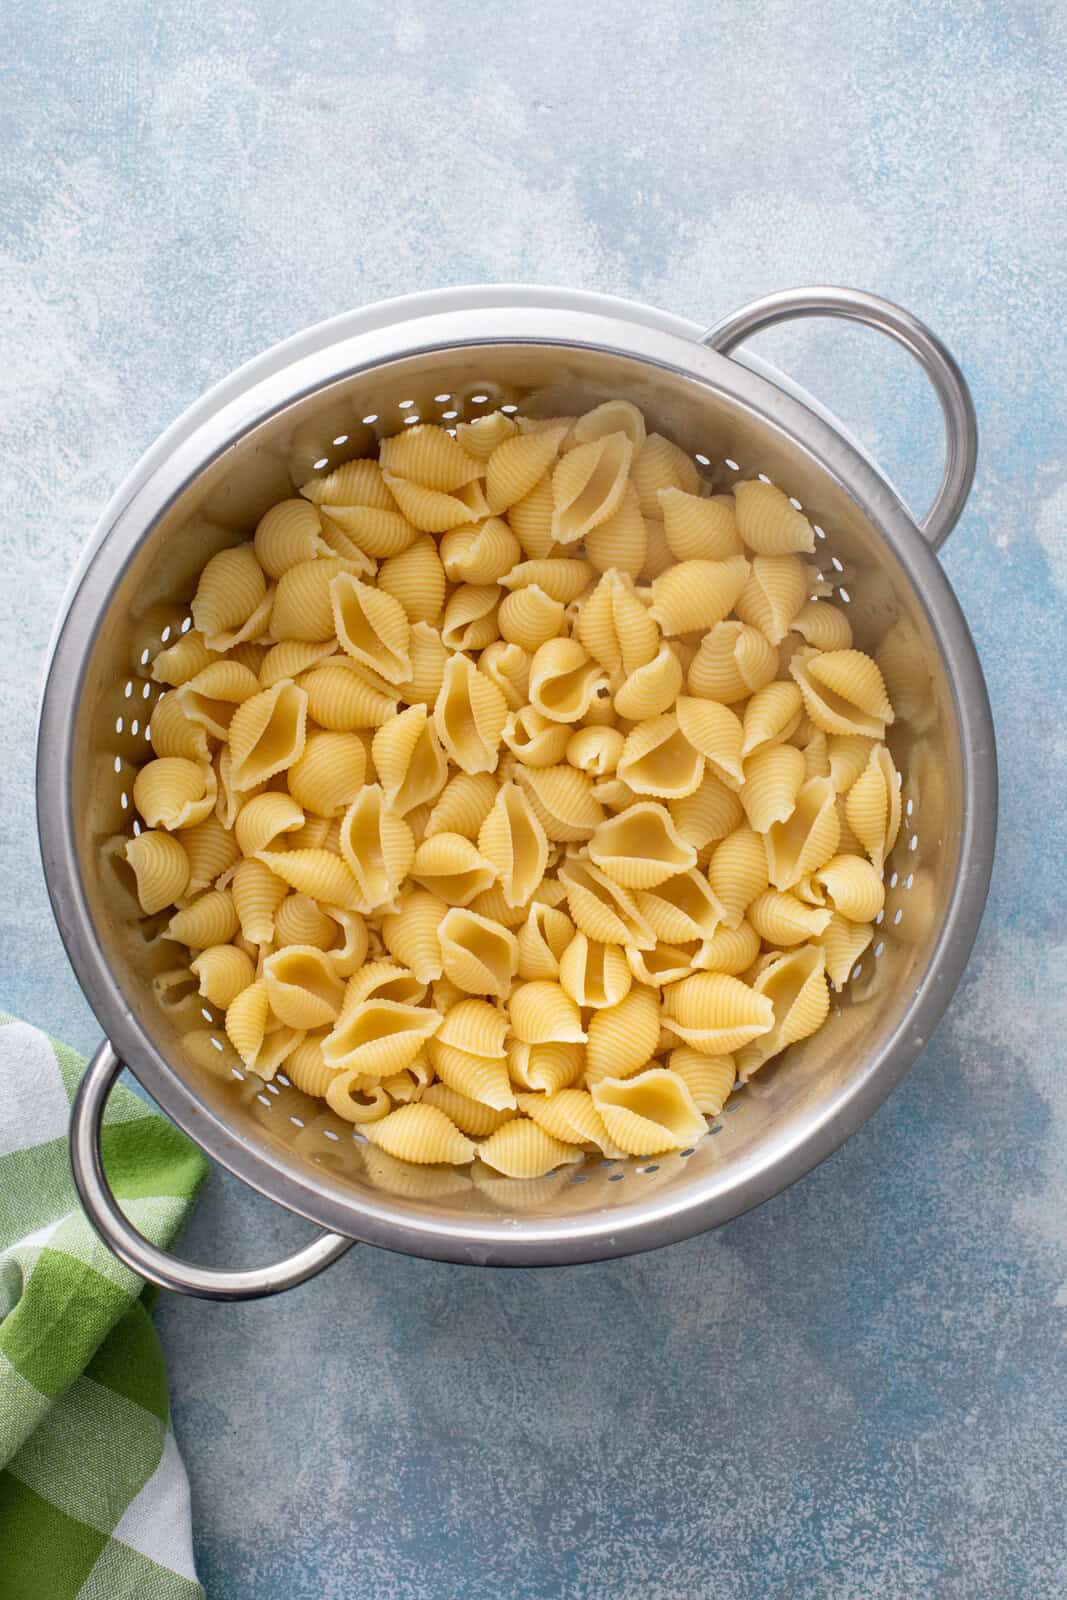 Cooked and drained pasta shells in a metal colander.